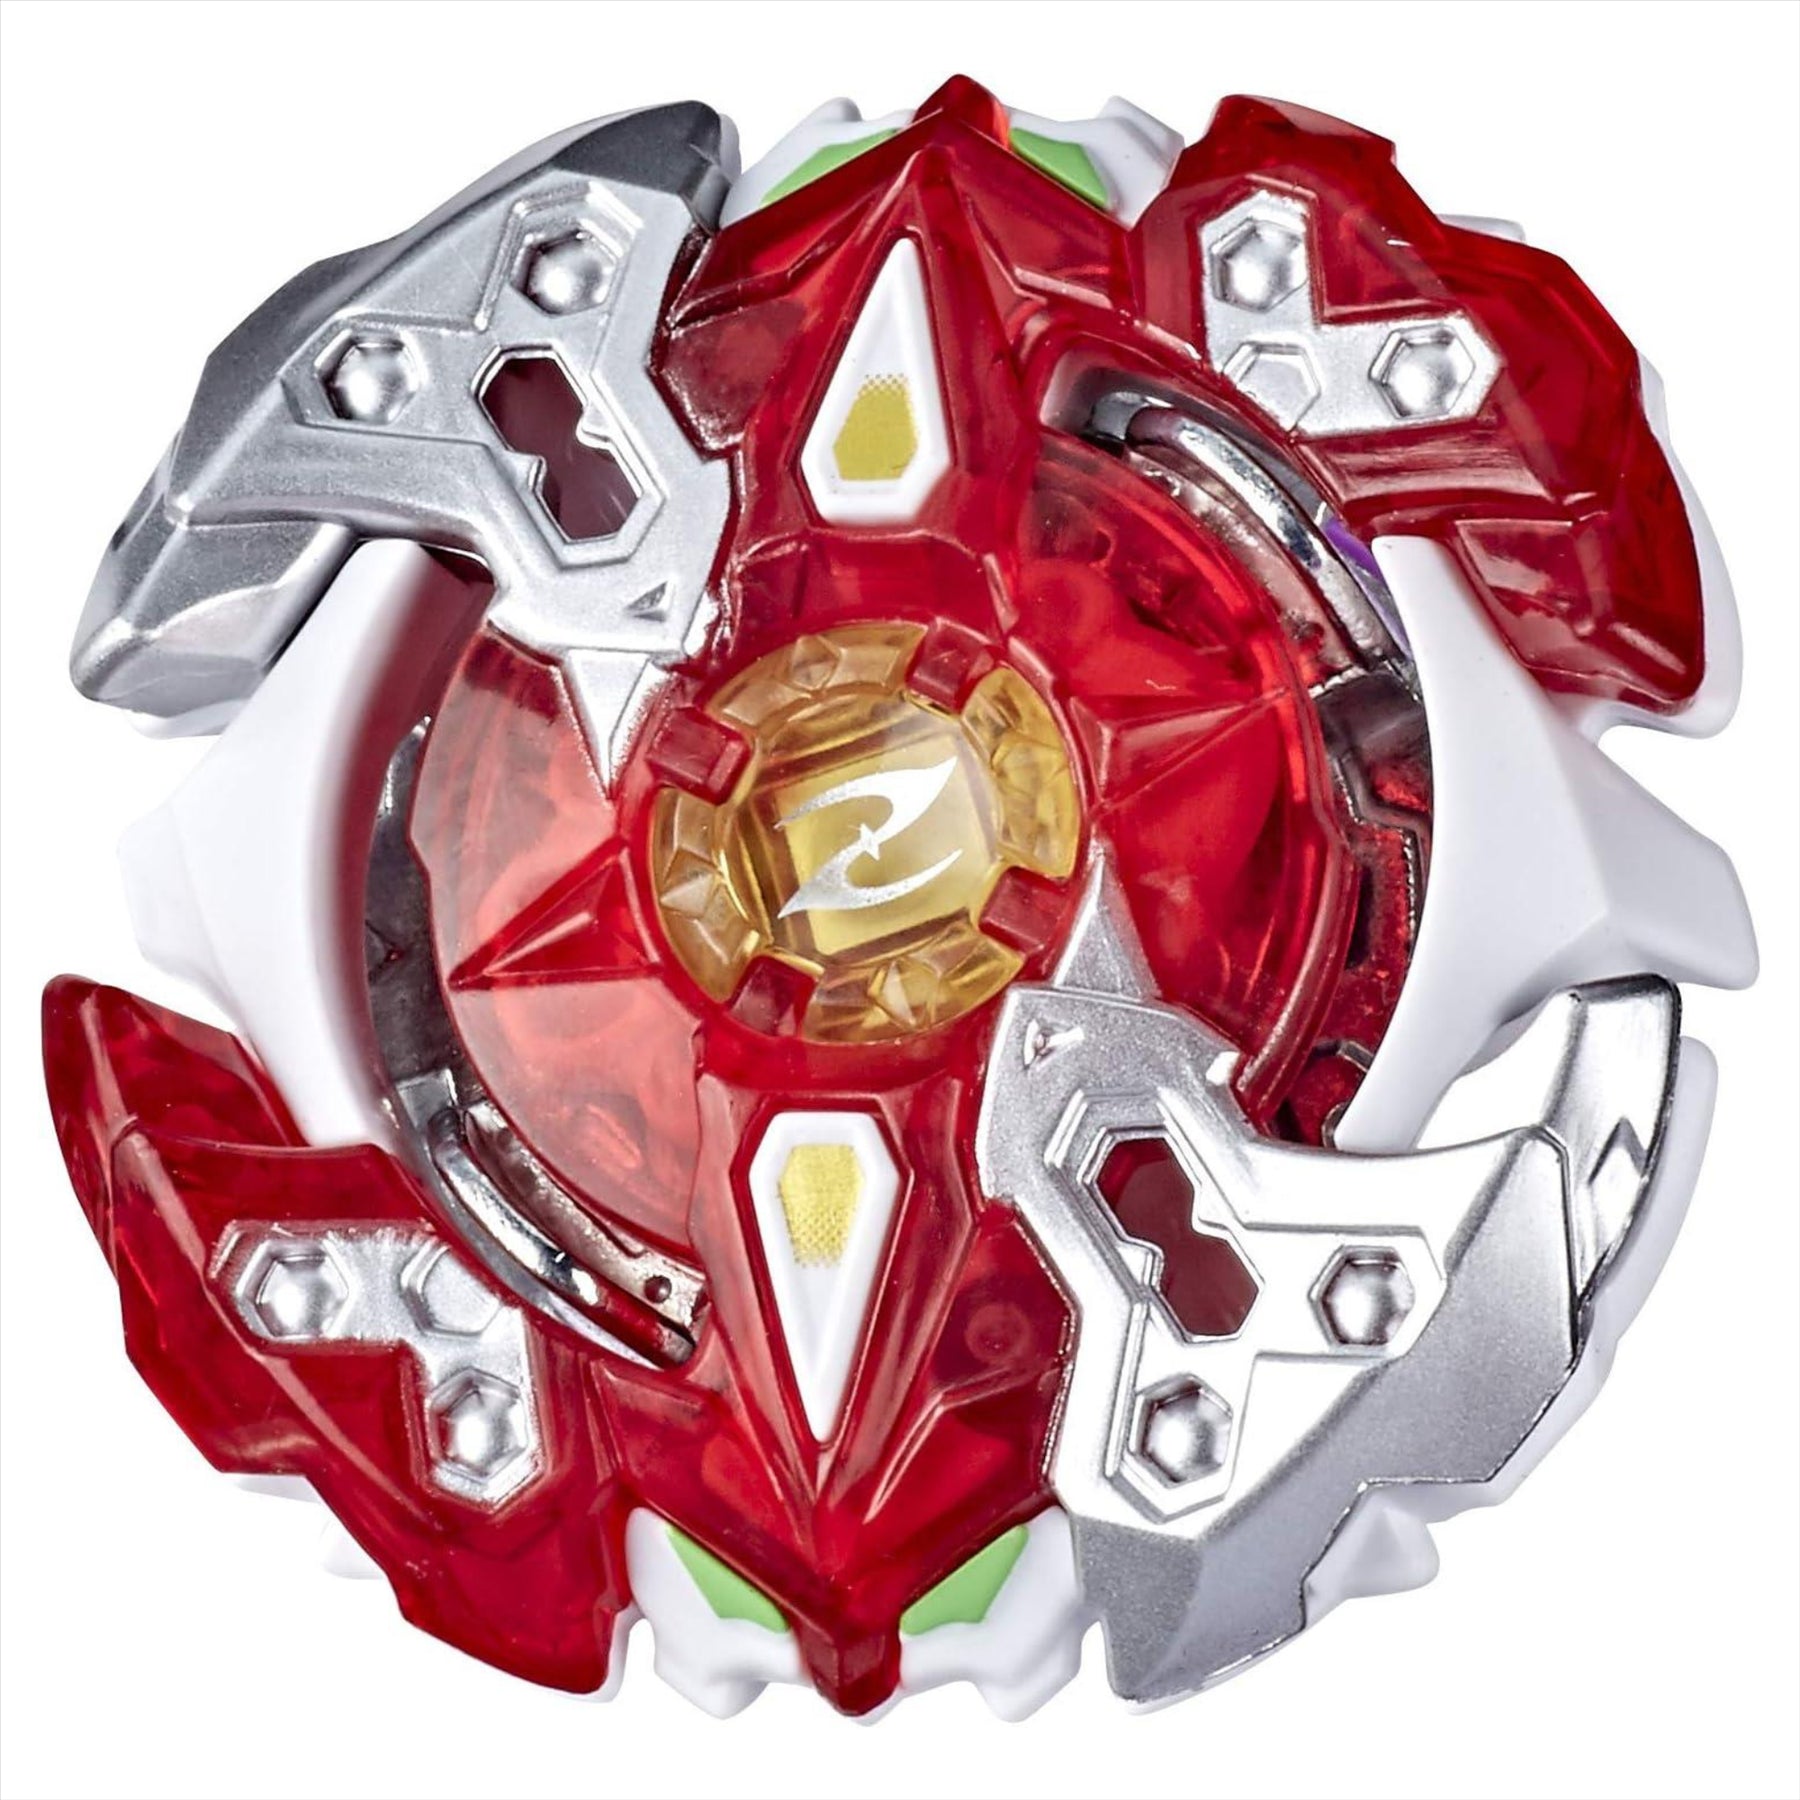 Beyblade Burst Rise Hypersphere Galaxy Zeutron Z5 Single Pack - Stamina Type Right-Spin Battling Top Toy, Ages 8+ - Toptoys2u